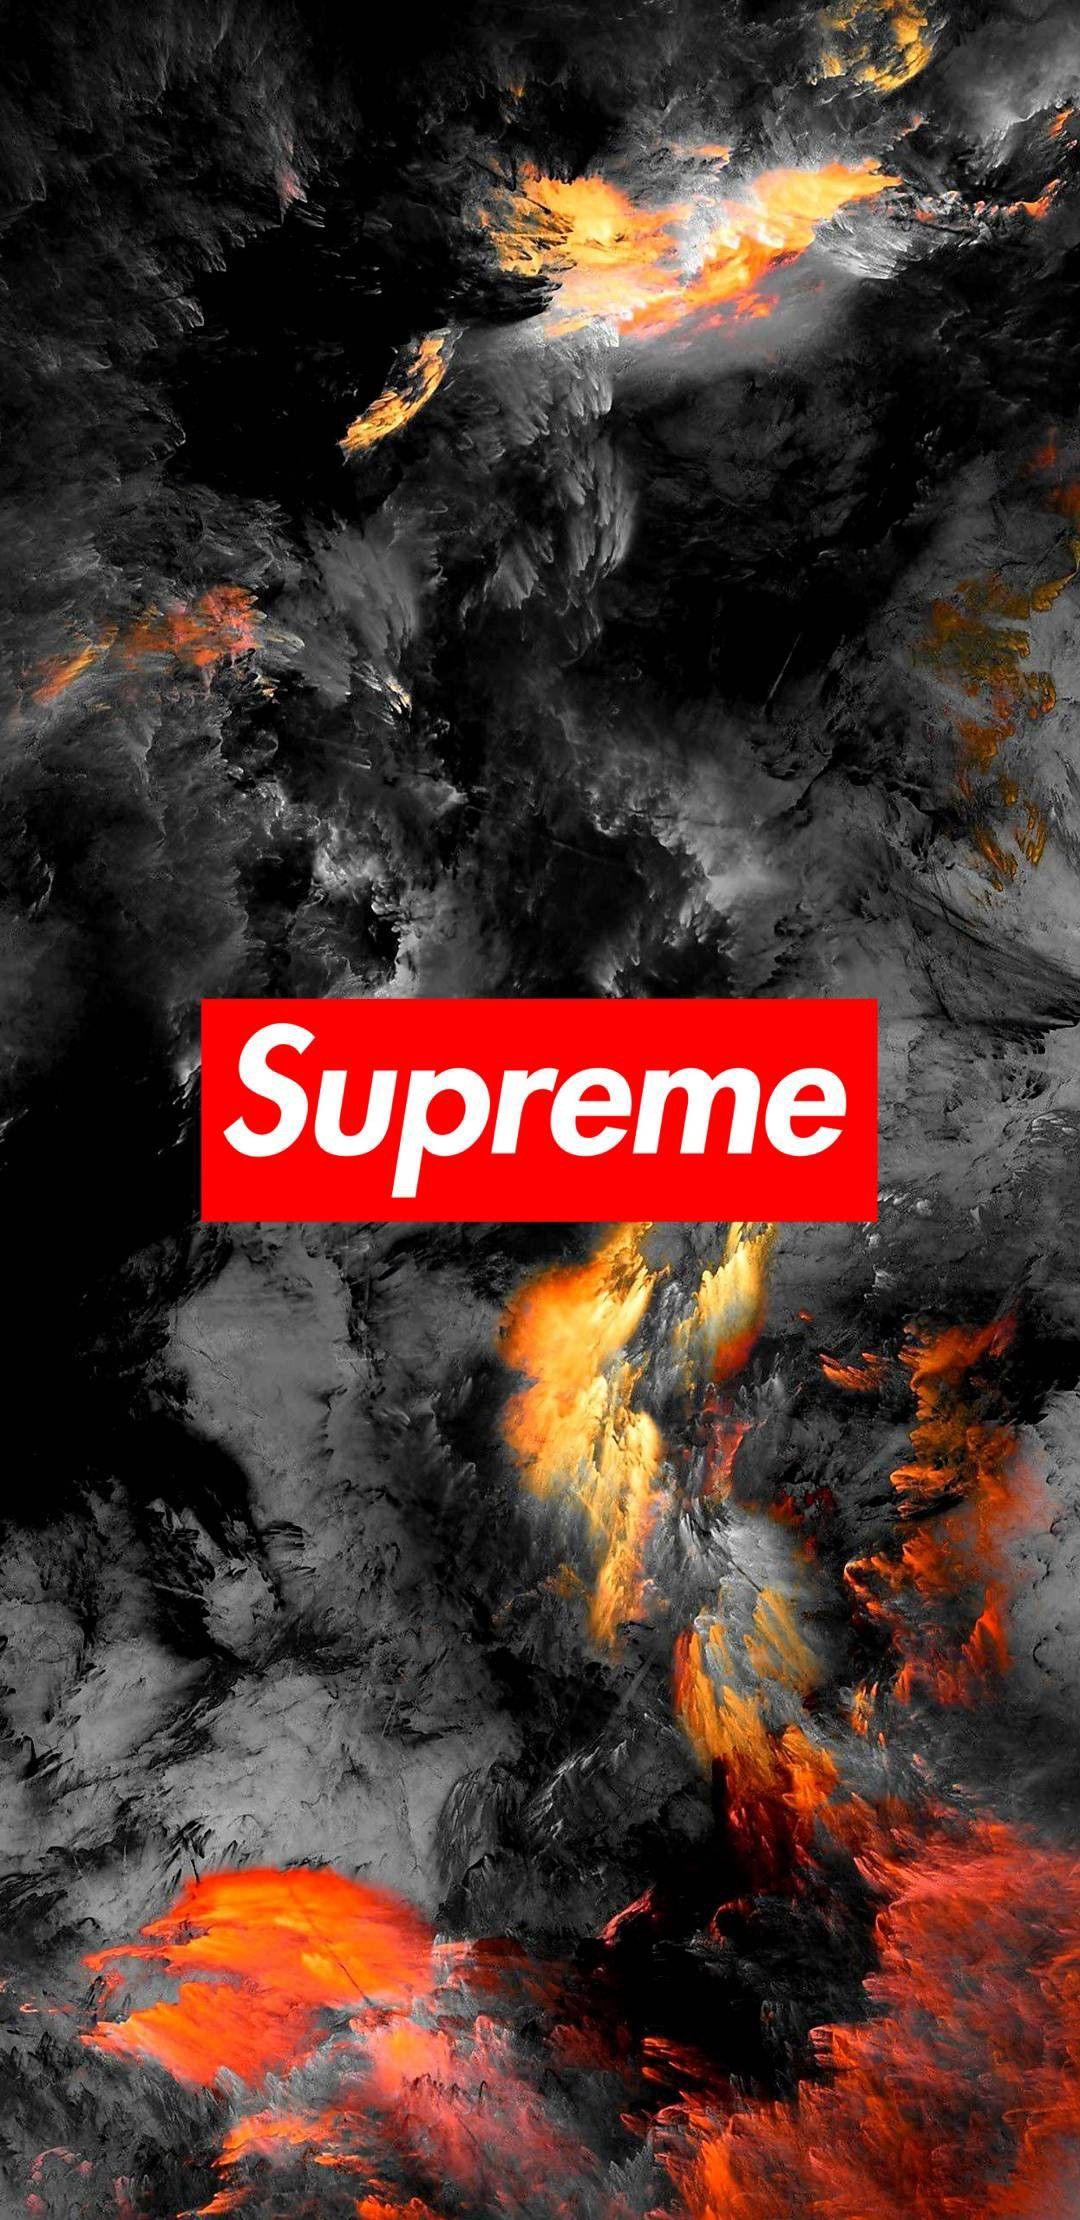 Cool Supreme Wallpapers - Wall.GiftWatches.CO